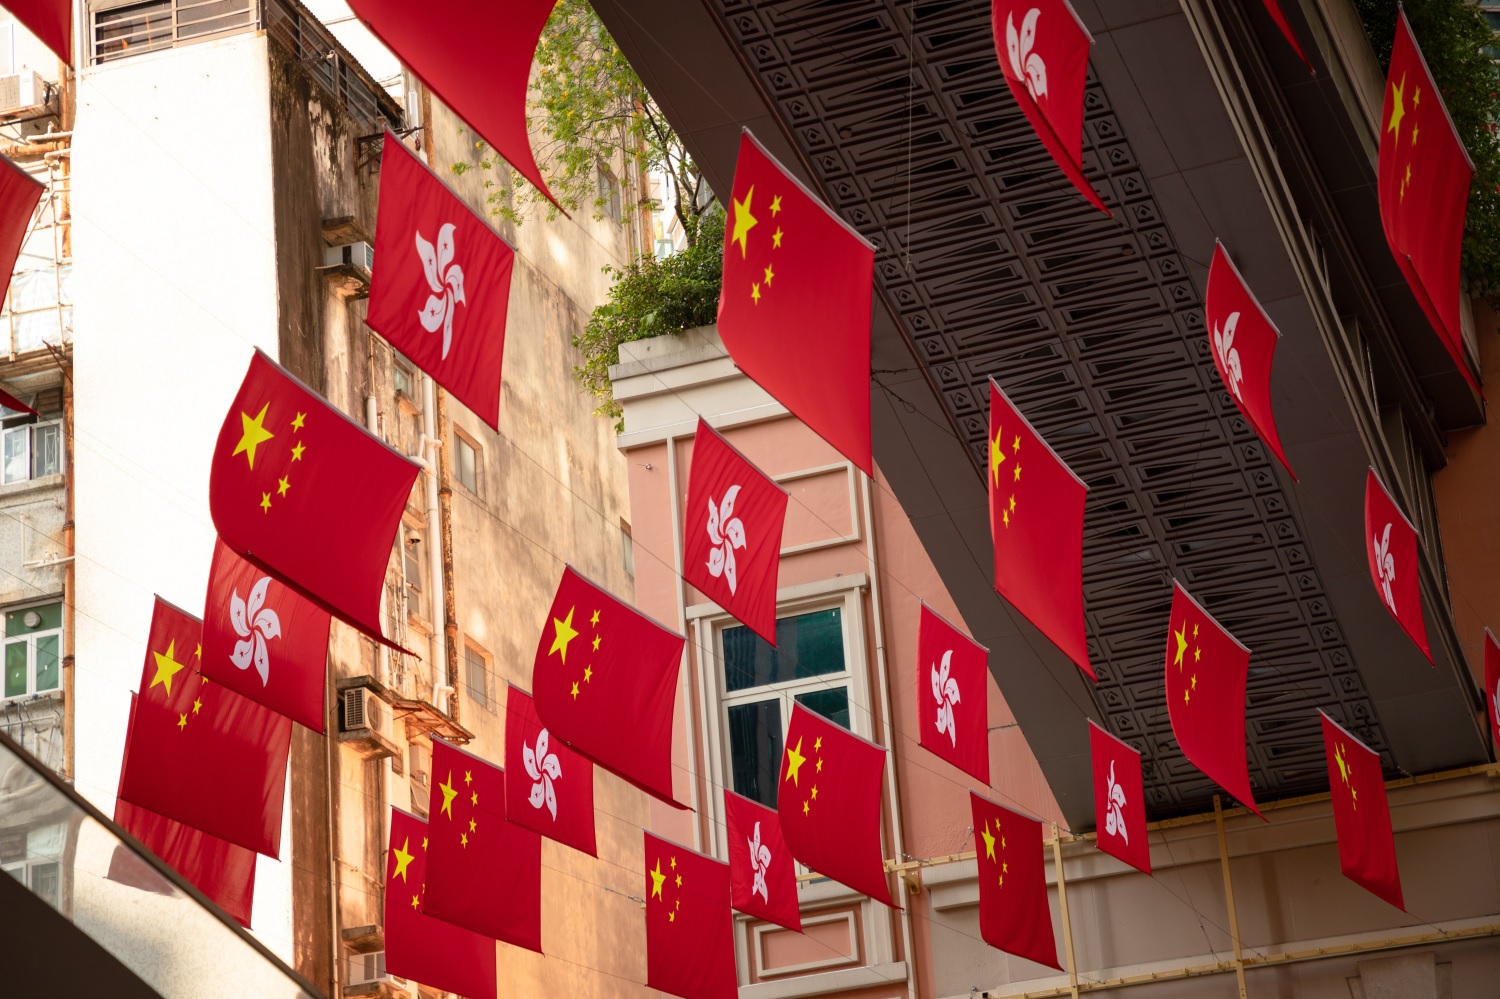 Flags of the People’s Republic and Hong Kong hang in a public street.